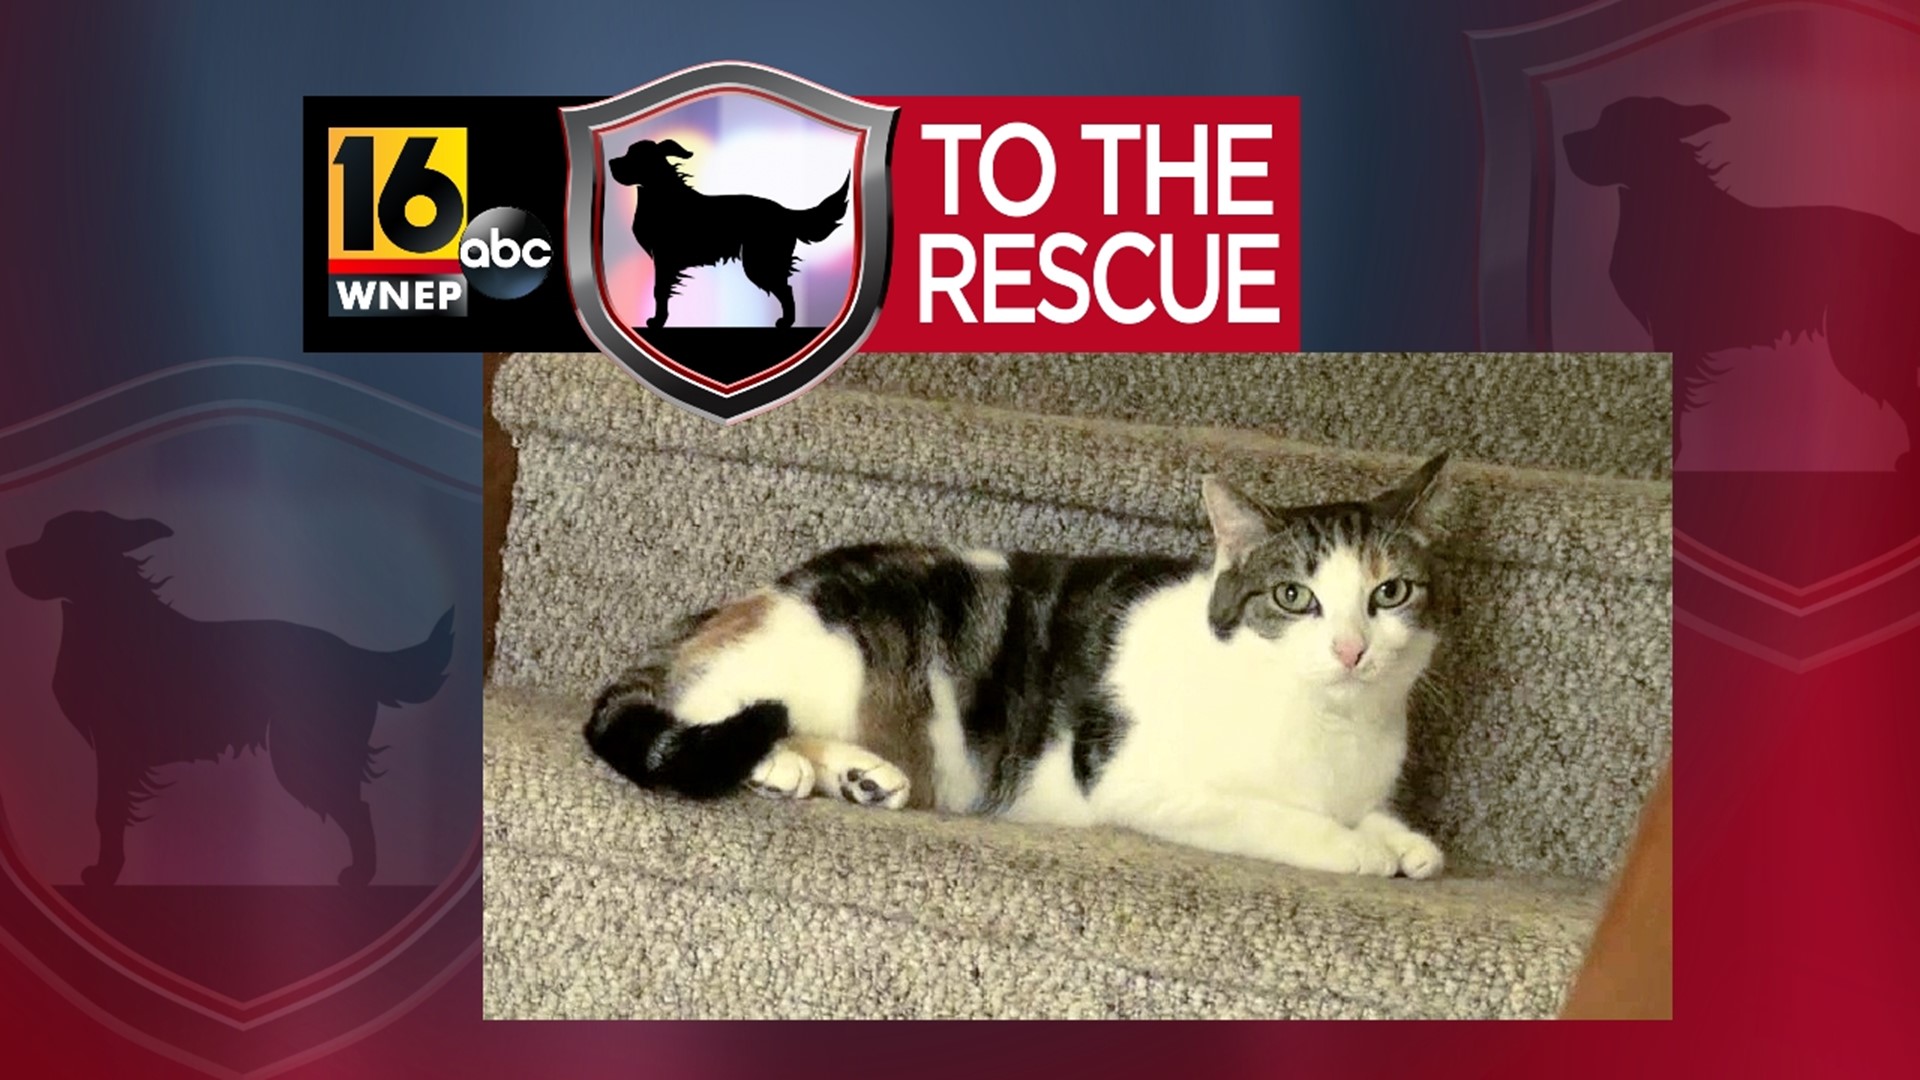 In this week's 16 To The Rescue, we meet a cat getting used to the good life in her foster home after being a stray.